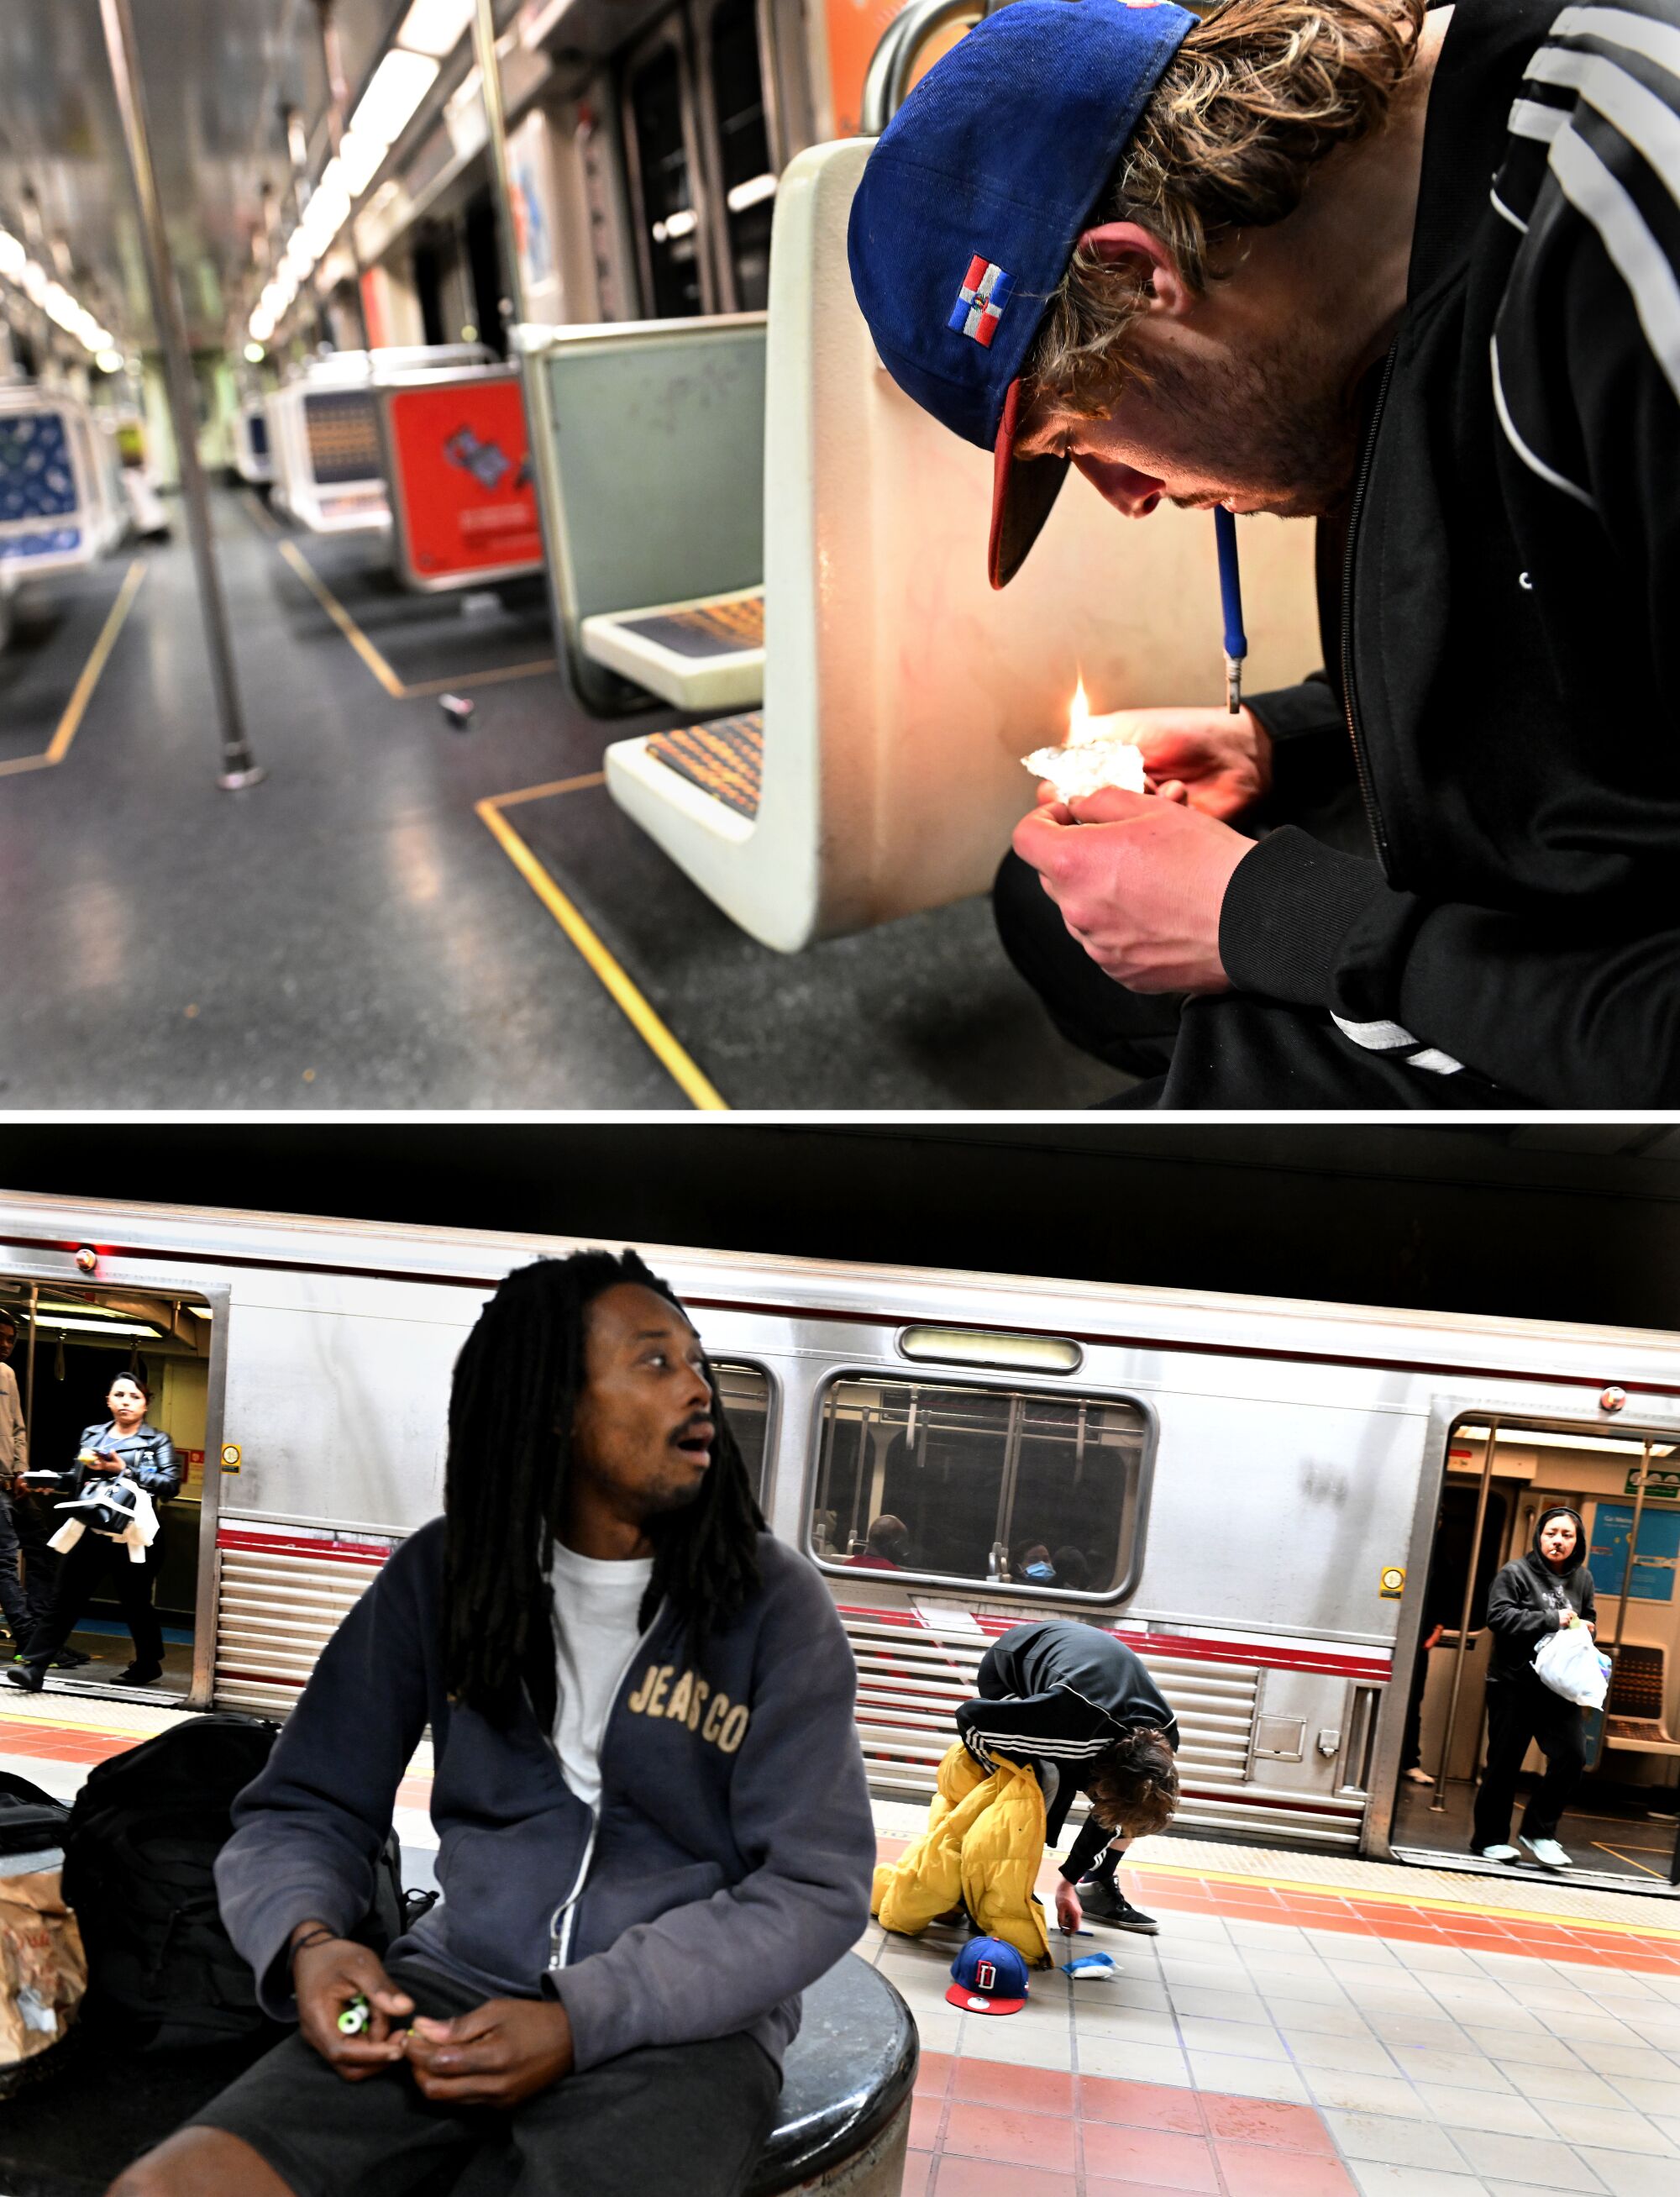 In the above photo a young man is smoking a substance from aluminum foil.  And below, a man sits on a bench in the subway as the train arrives